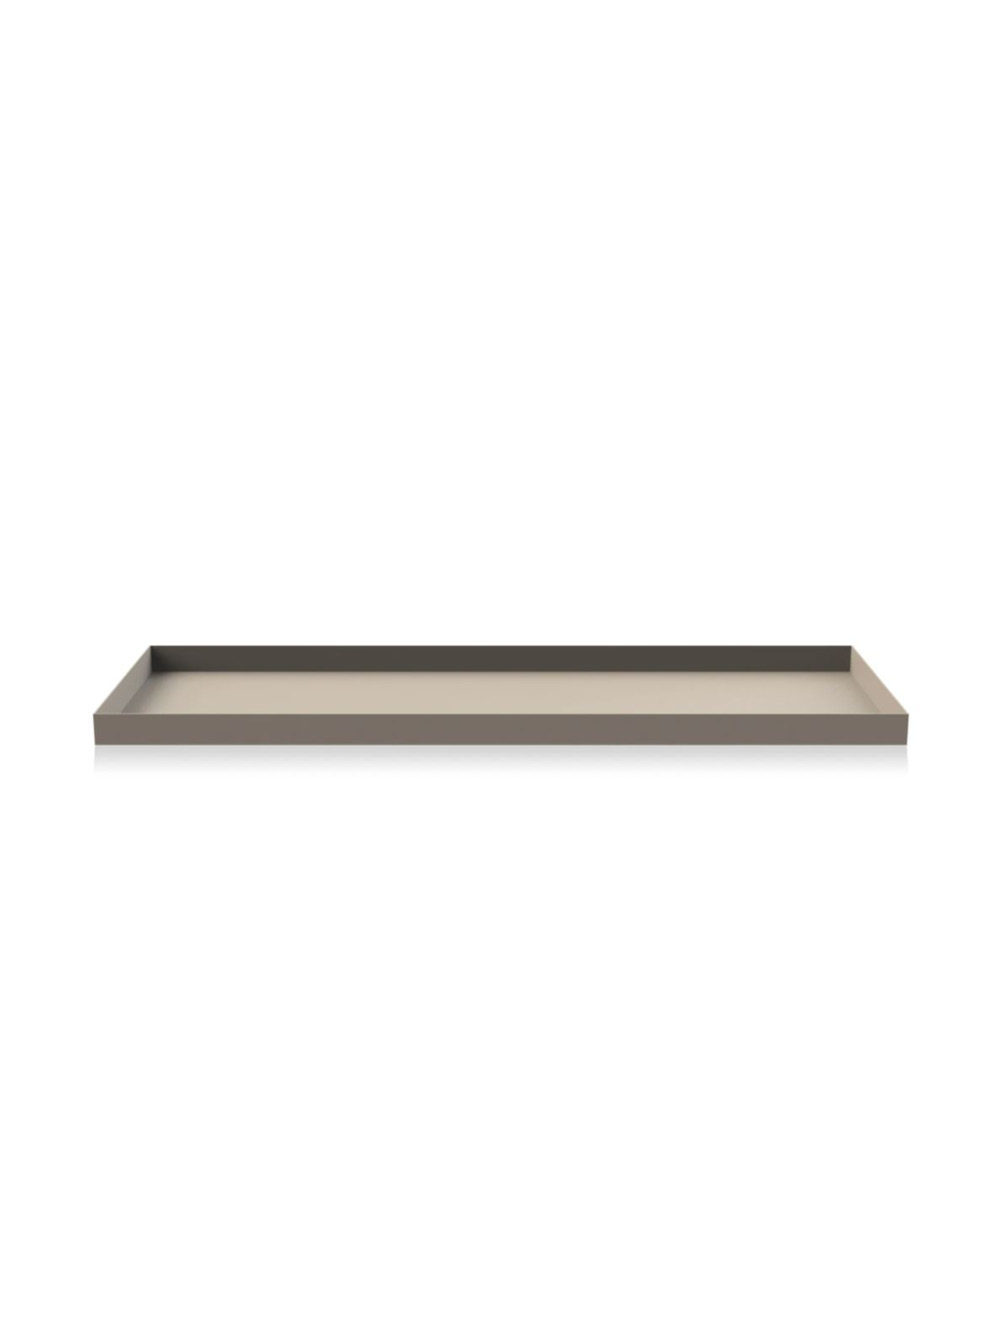 Long Metal Tray, Cooee Design - Beige Sand